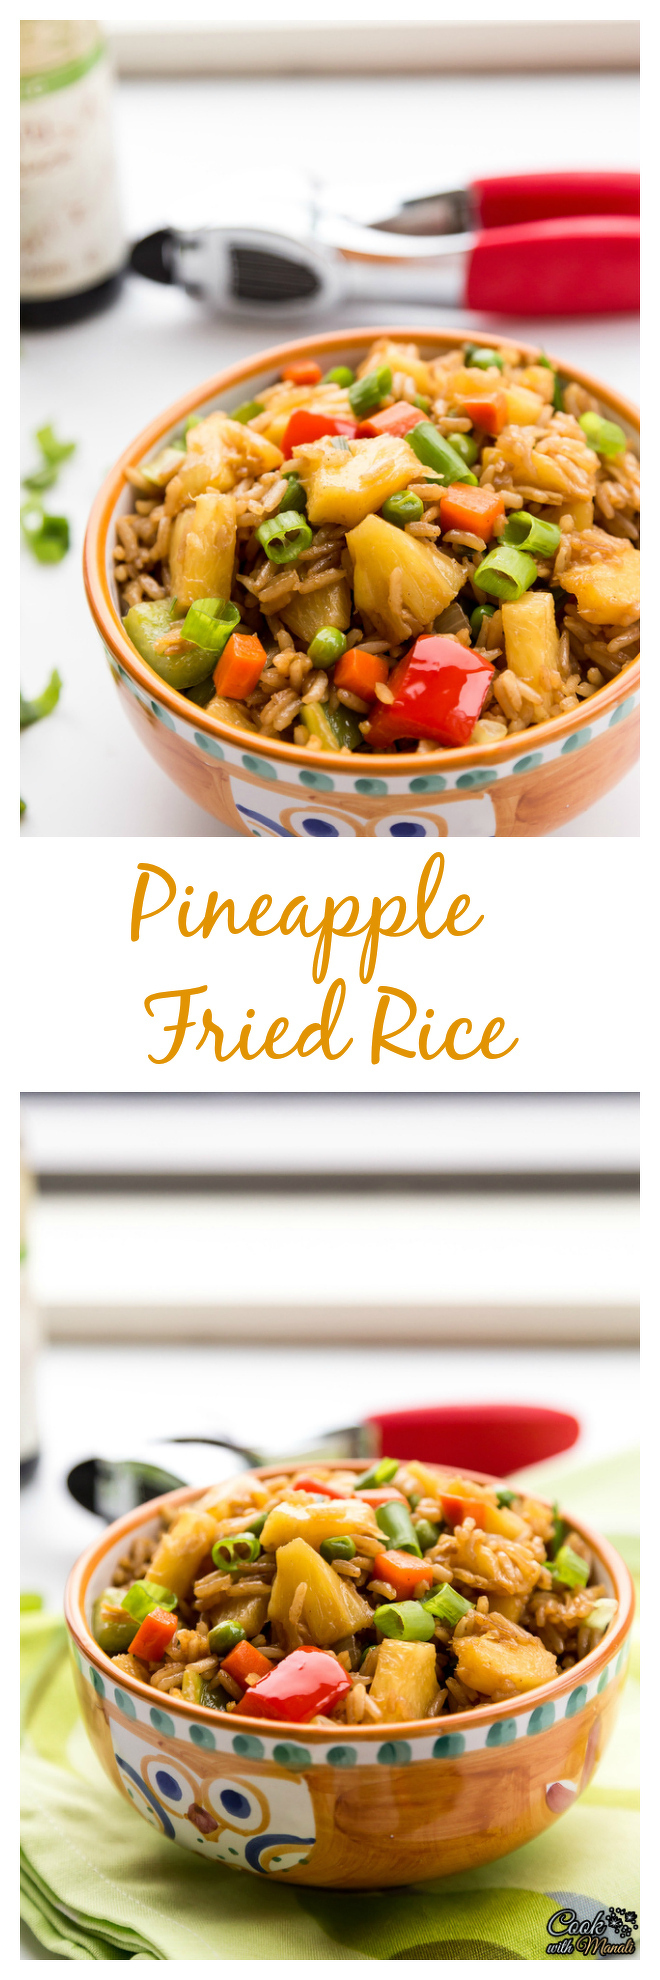 Pineapple-Fried-Rice-Collage-nocwm